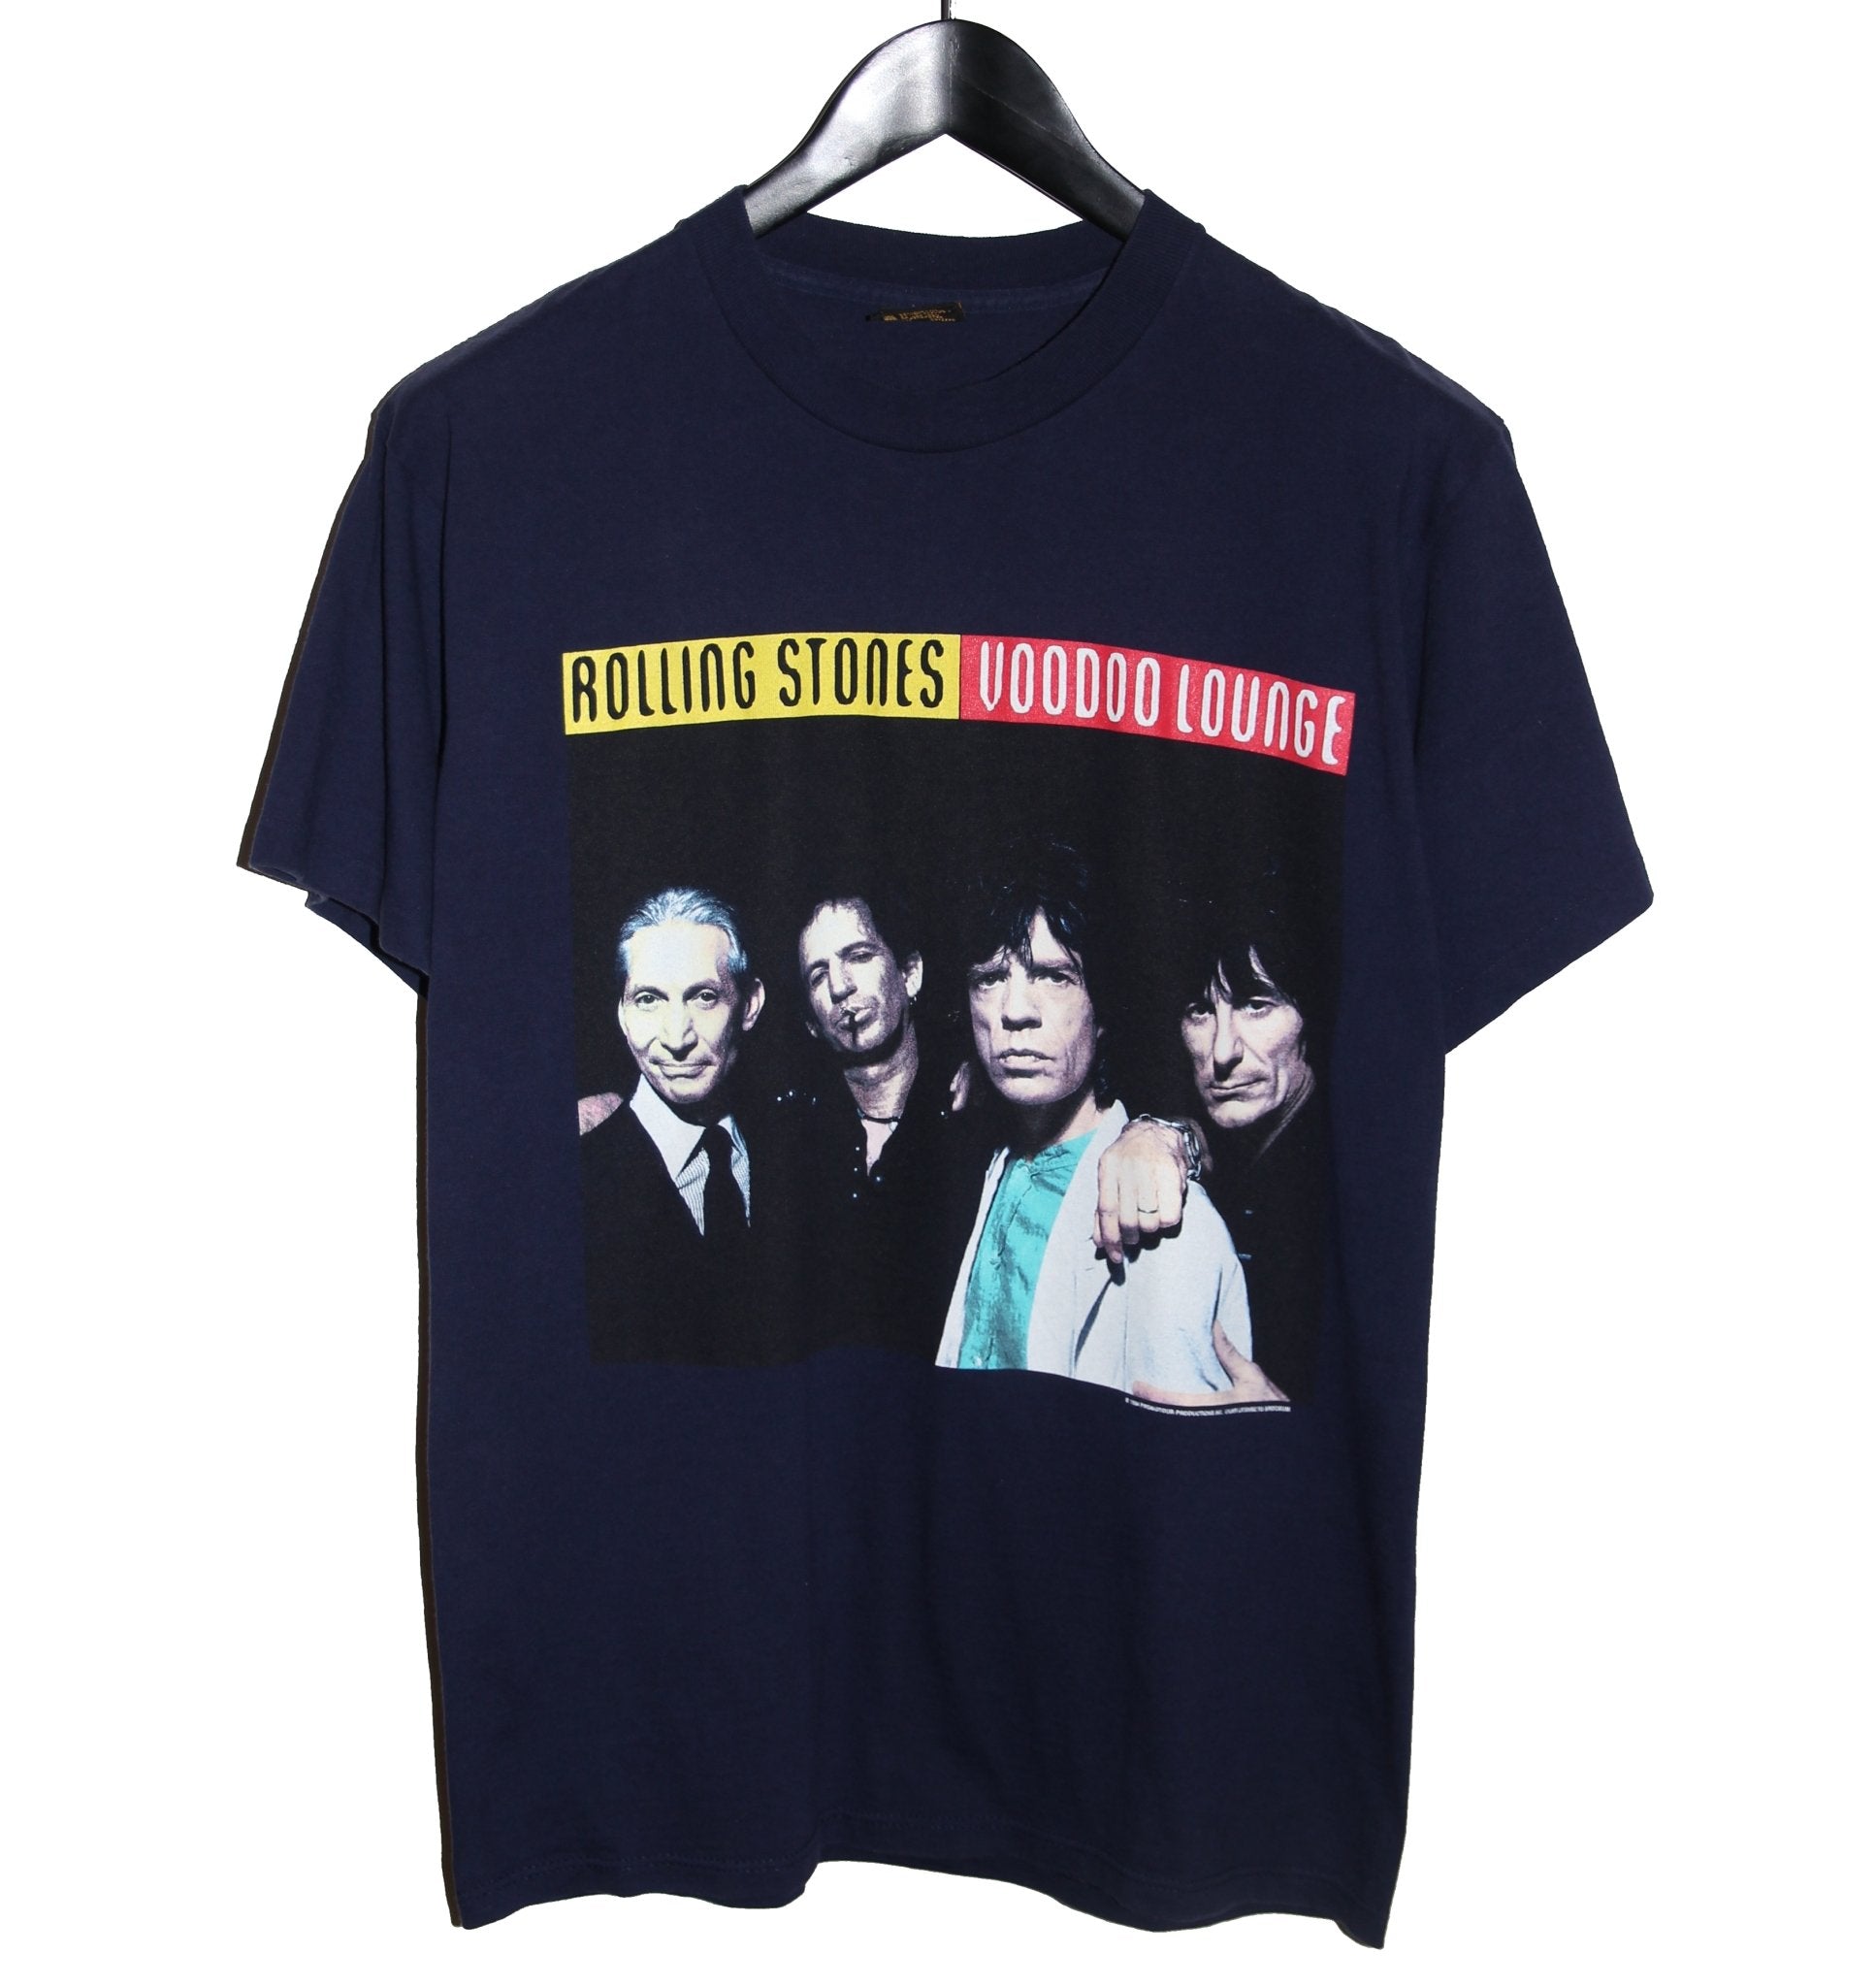 The Rolling Stones 1994 Voodoo Lounge Tour Shirt - Faded AU